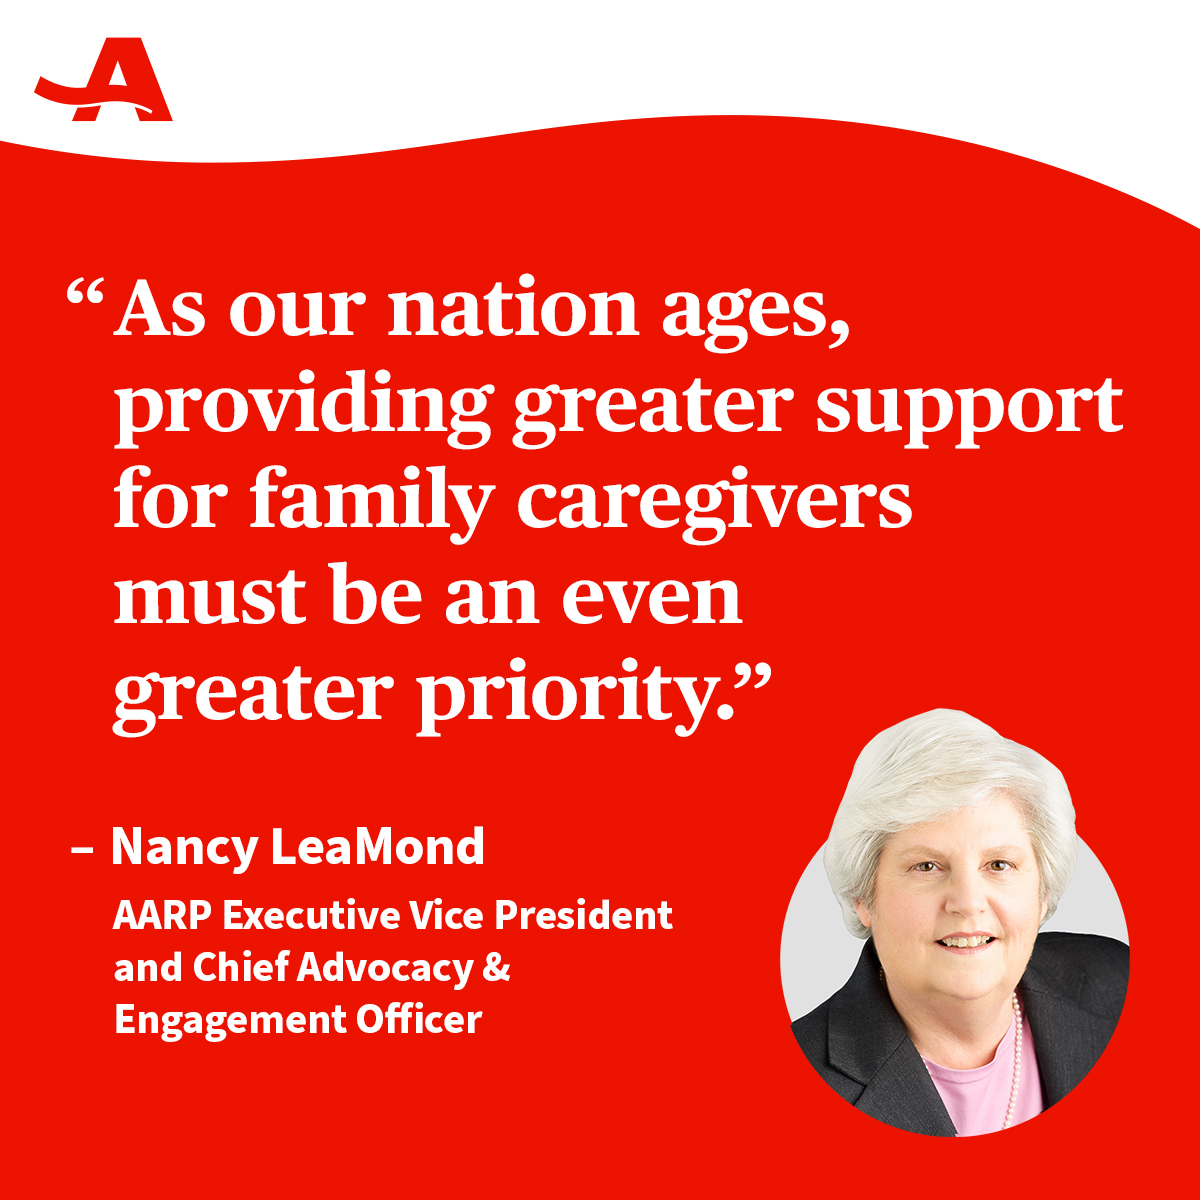 On the one-year anniversary of the Care Executive Order, we celebrate the progress made and remain committed to working toward bipartisan solutions that deliver further relief to America's caregivers. Read the full statement from AARP's @NancyLeaMond: spr.ly/6017b3P5J